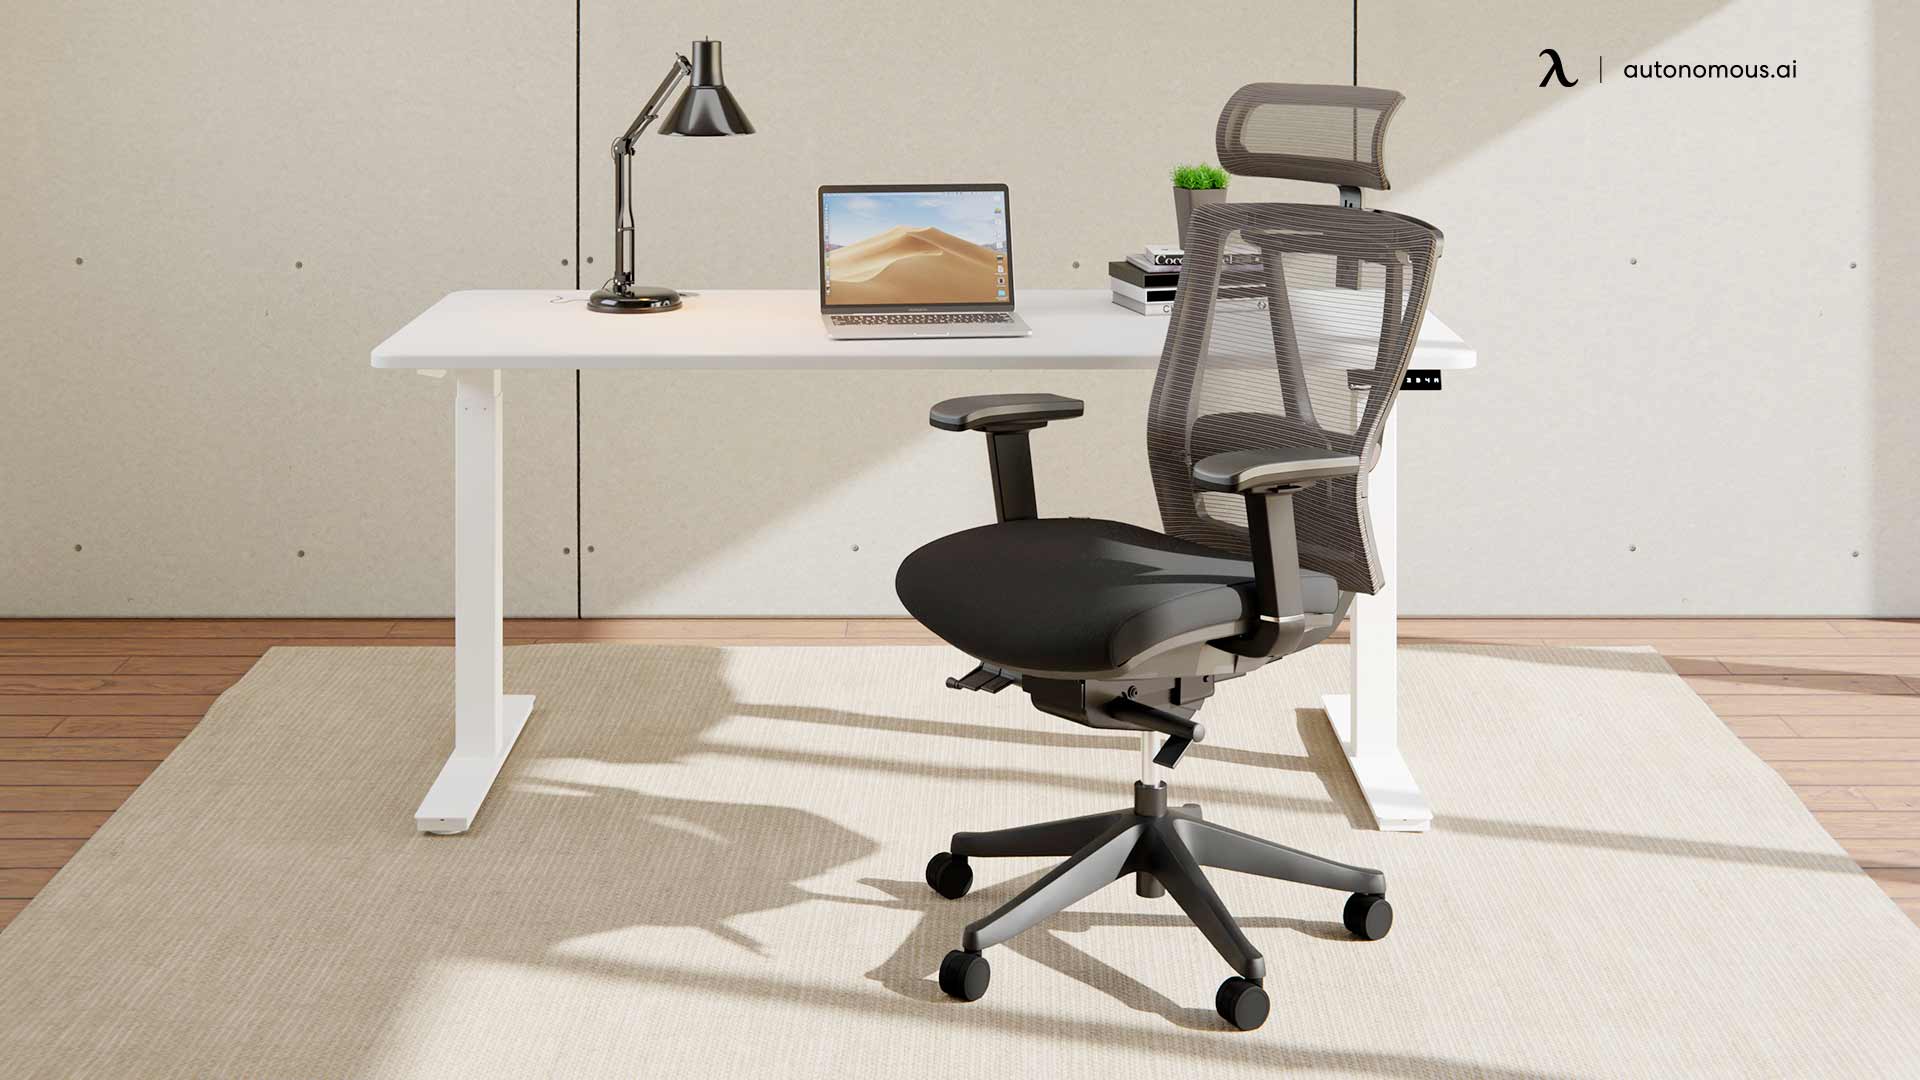 Ergonomic Chair in Home Office Upgrades